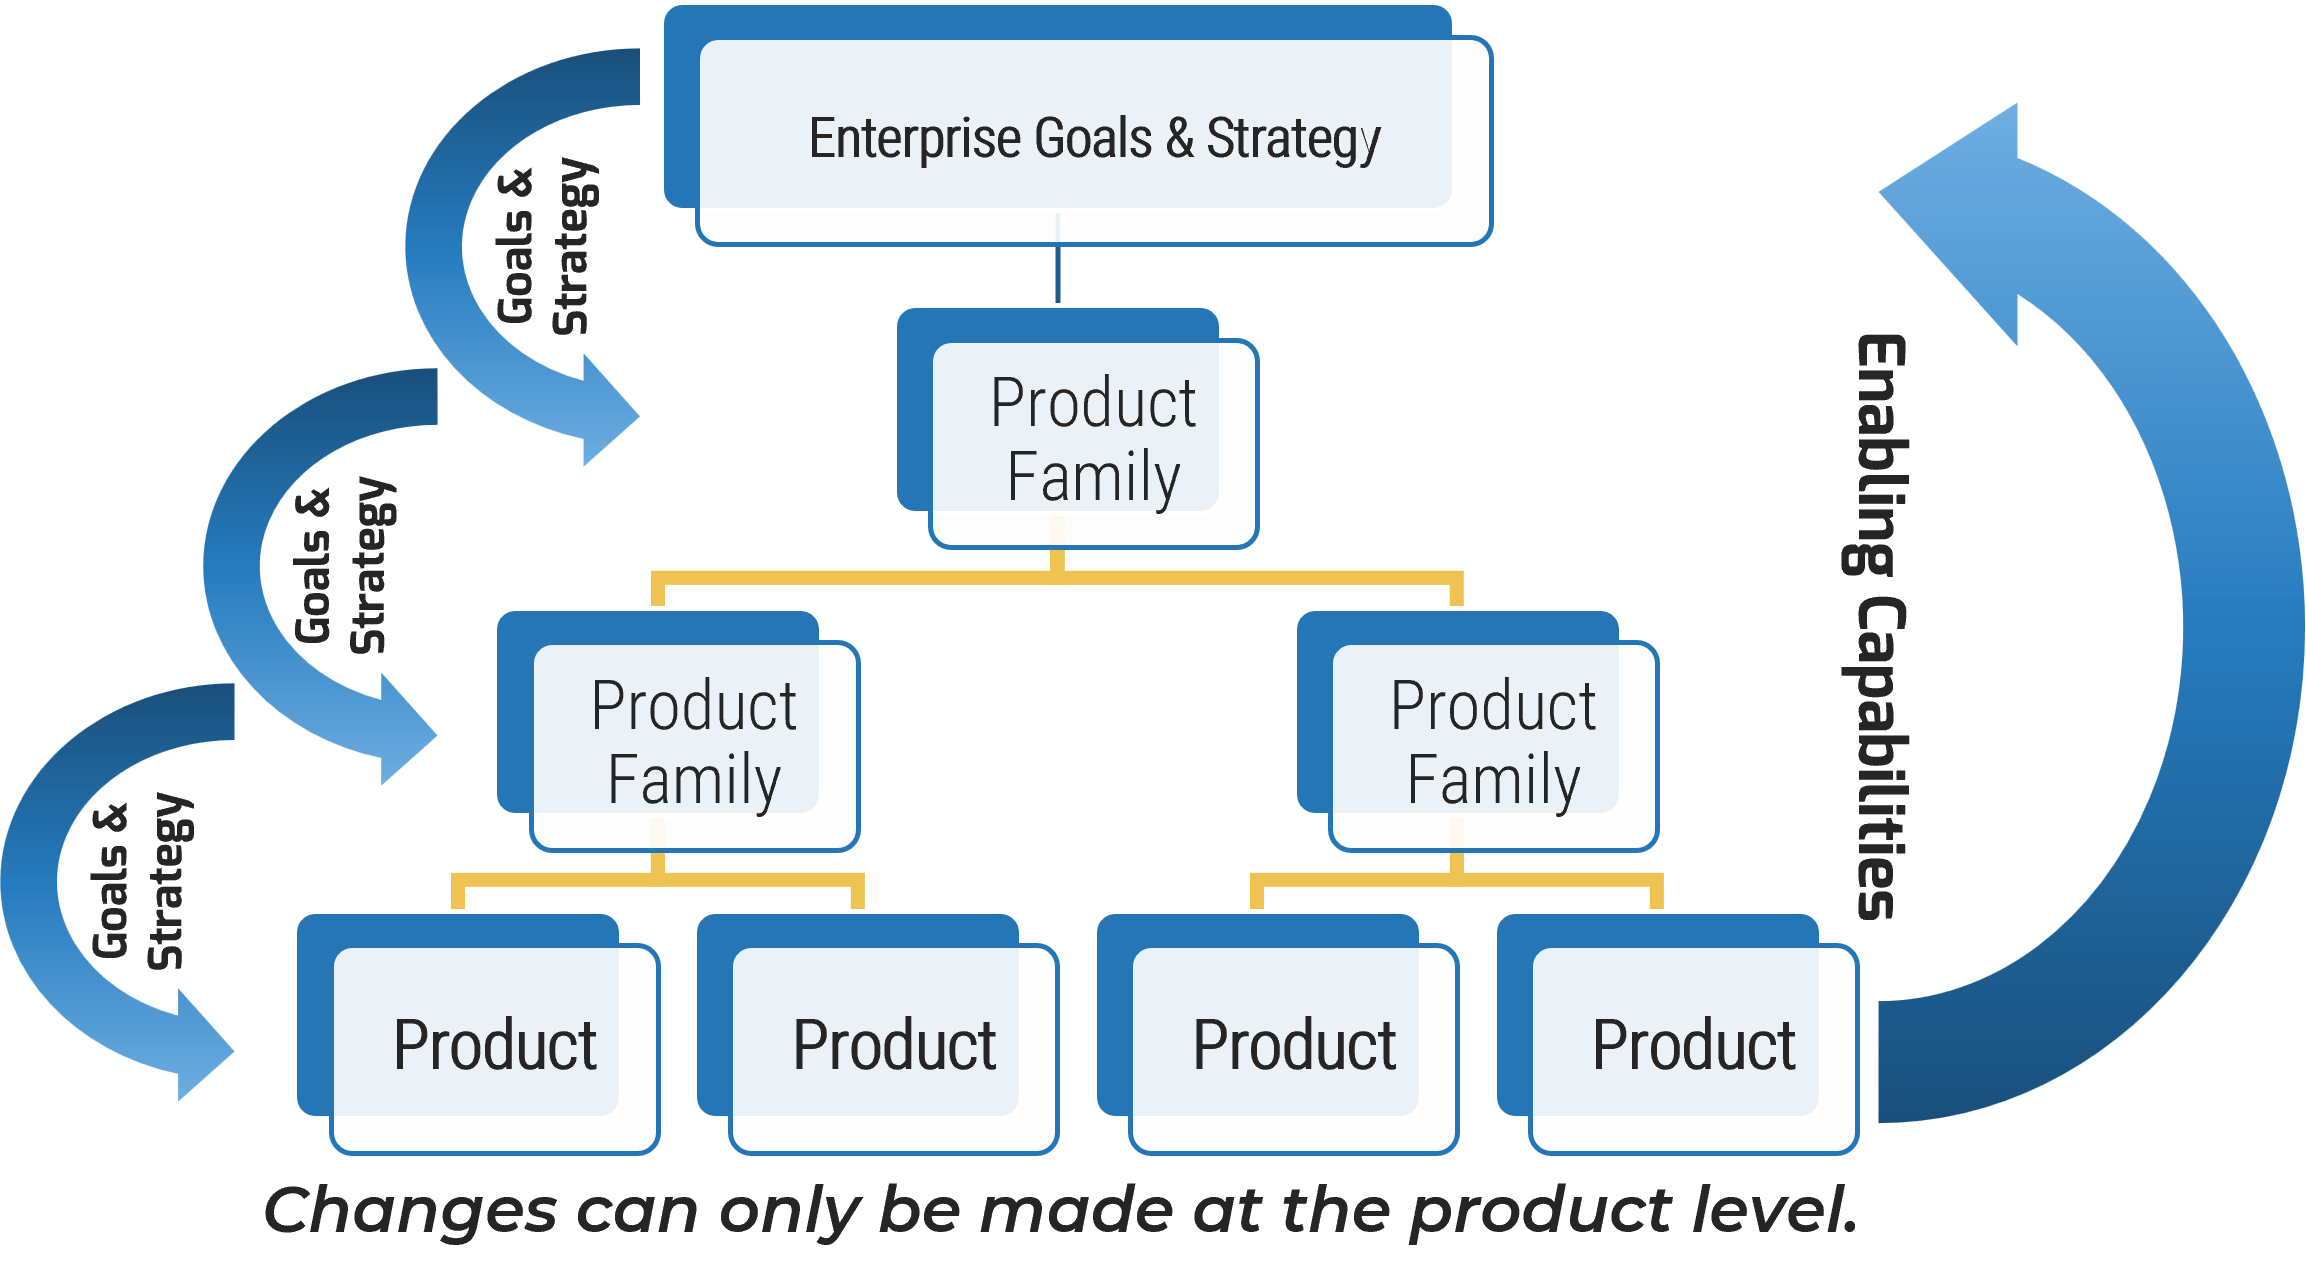 A hierarchy showing how to break enterprise goals and strategy down into product families.